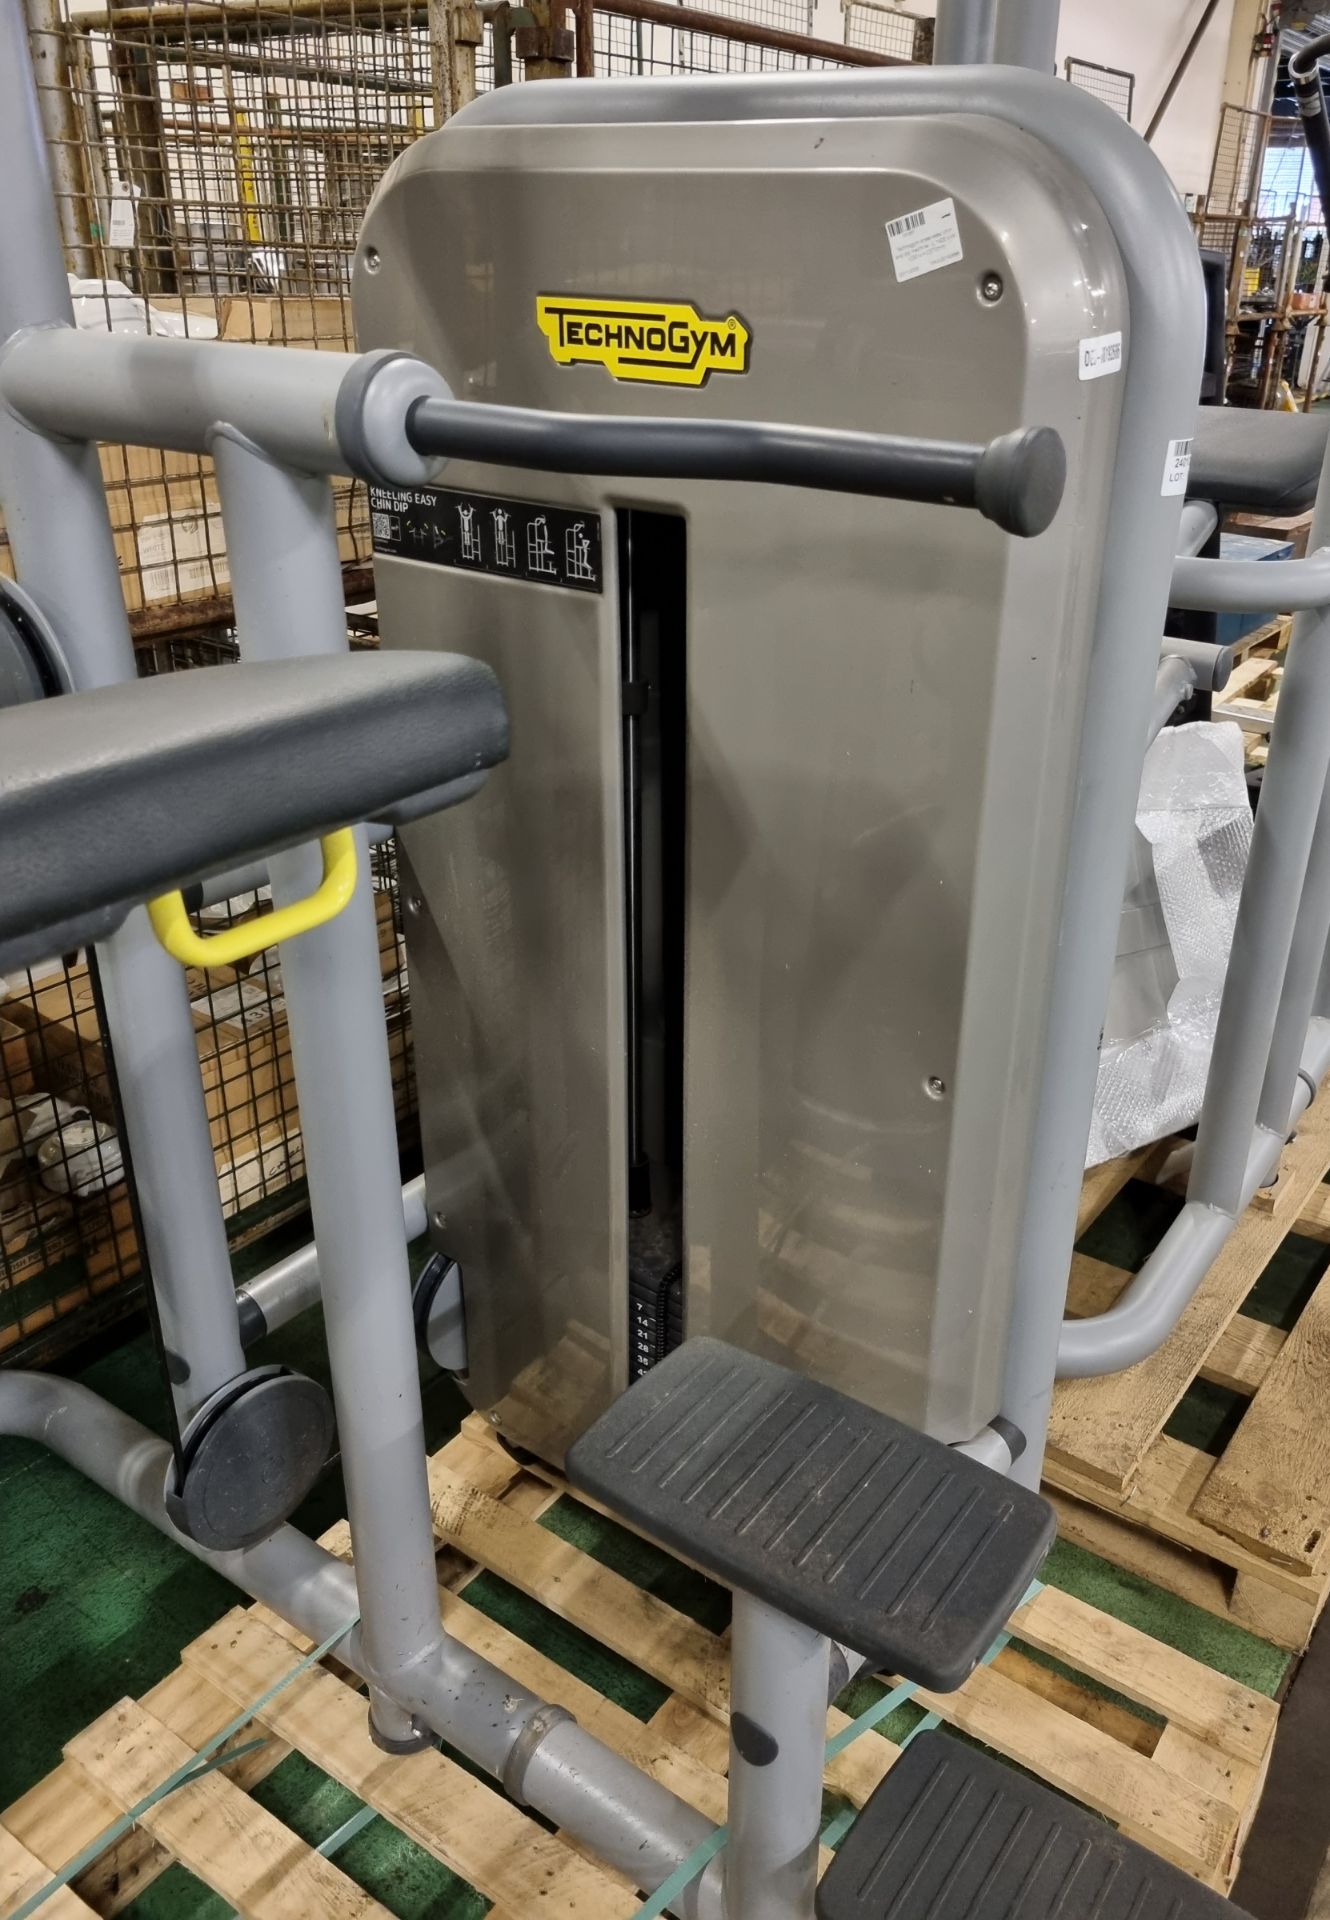 Technogym kneel-easy chin and dip machine (plastic damaged on unit as pictured) - L 1420 x W 1290mm - Image 5 of 6